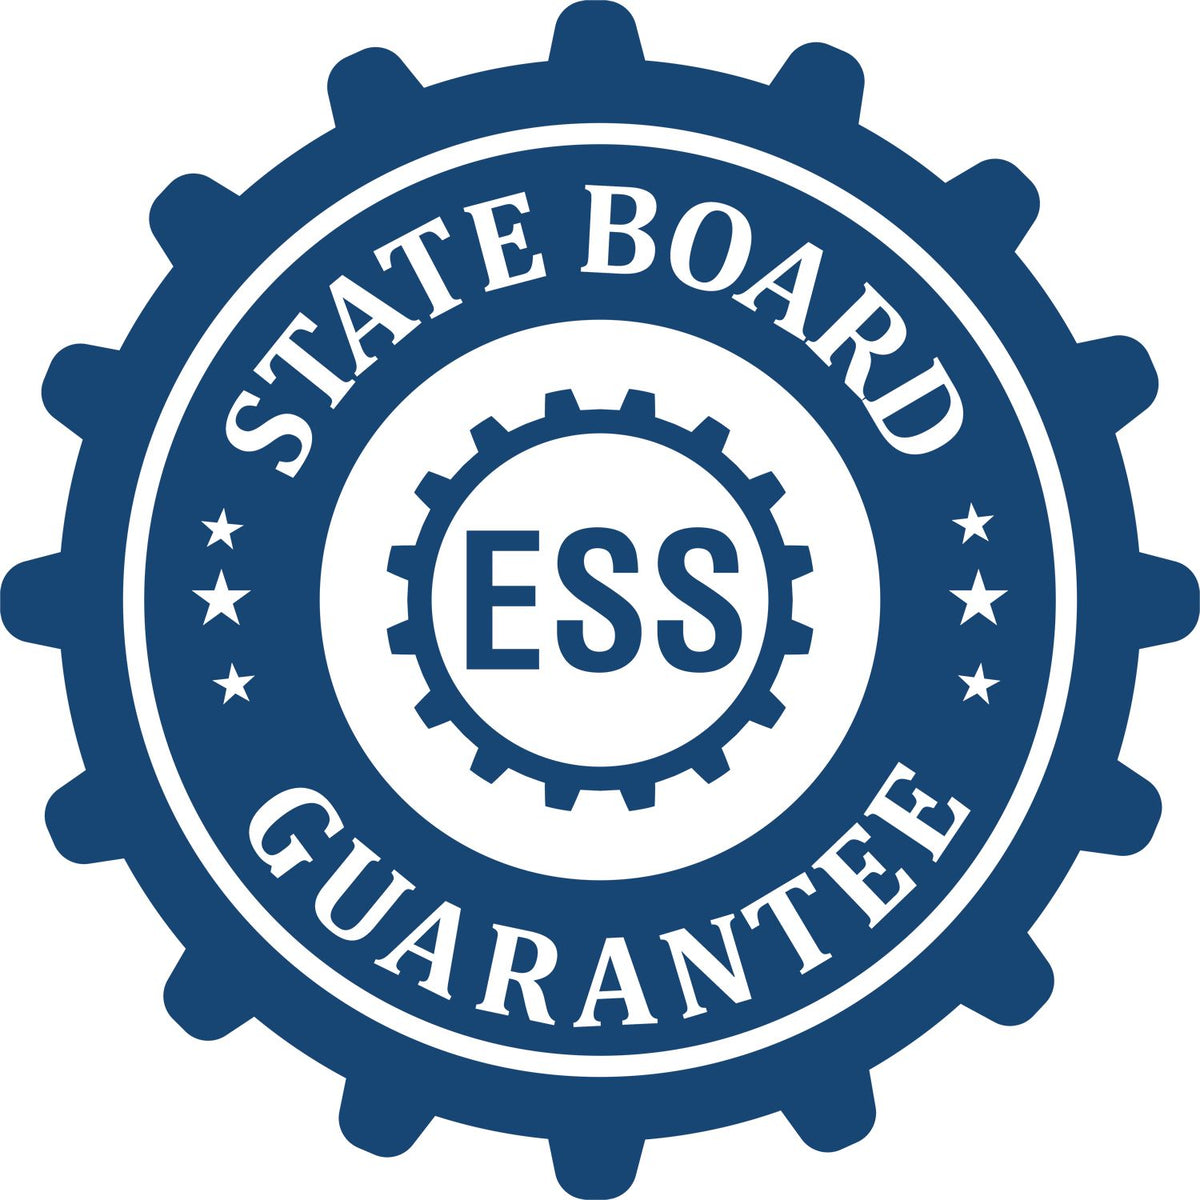 An emblem in a gear shape illustrating a state board guarantee for the Digital Kentucky Landscape Architect Stamp product.